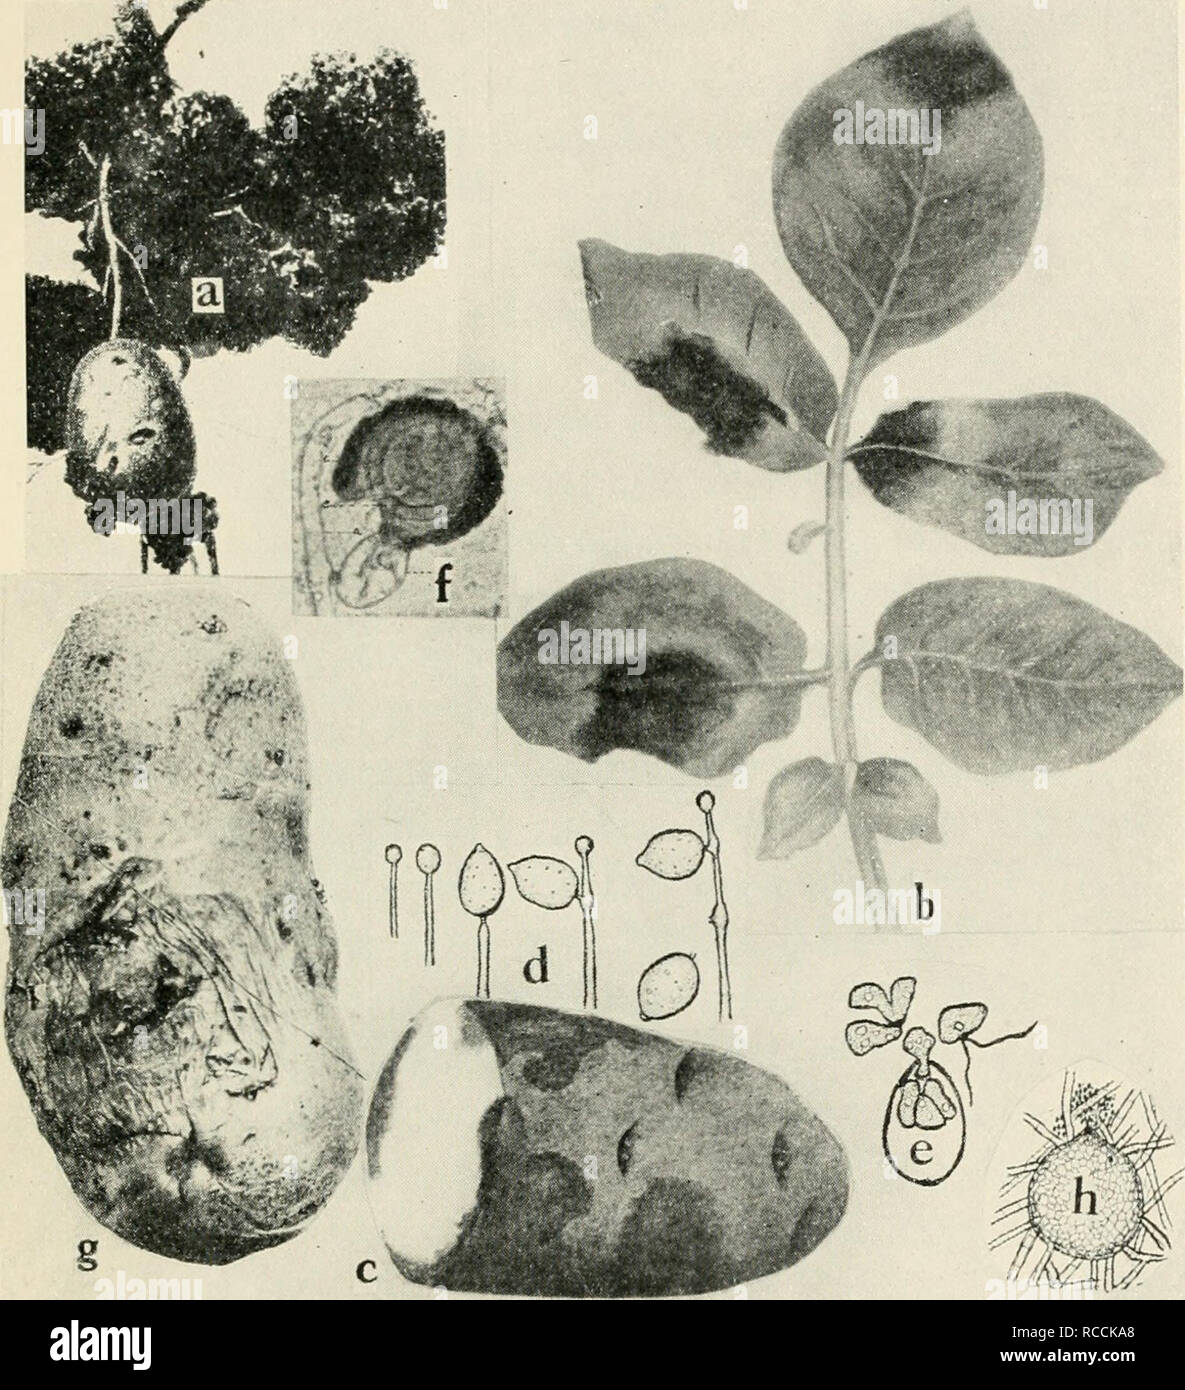 . Diseases of truck crops and their control. Plants -- Diseases. Fig. 6i. Potato Diseases. a. Black wart (after Gussow), b. late blight on foliage, c. late blight on tuber, d. successive stages of the development of the conidia of Phyiophthora infestans (b. and d. after L. R. Jones), e. germination of conidia of Phytophlhora infestayis, bv means of zoopores (after Ward),/, mature oogonium of P. infestans (after Clinton)'. R. melters. surface view, early stage of infection, h. pycnidium of Phoma tuberose (after Melhus and Rosenbaum).. Please note that these images are extracted from scanned pag Stock Photo